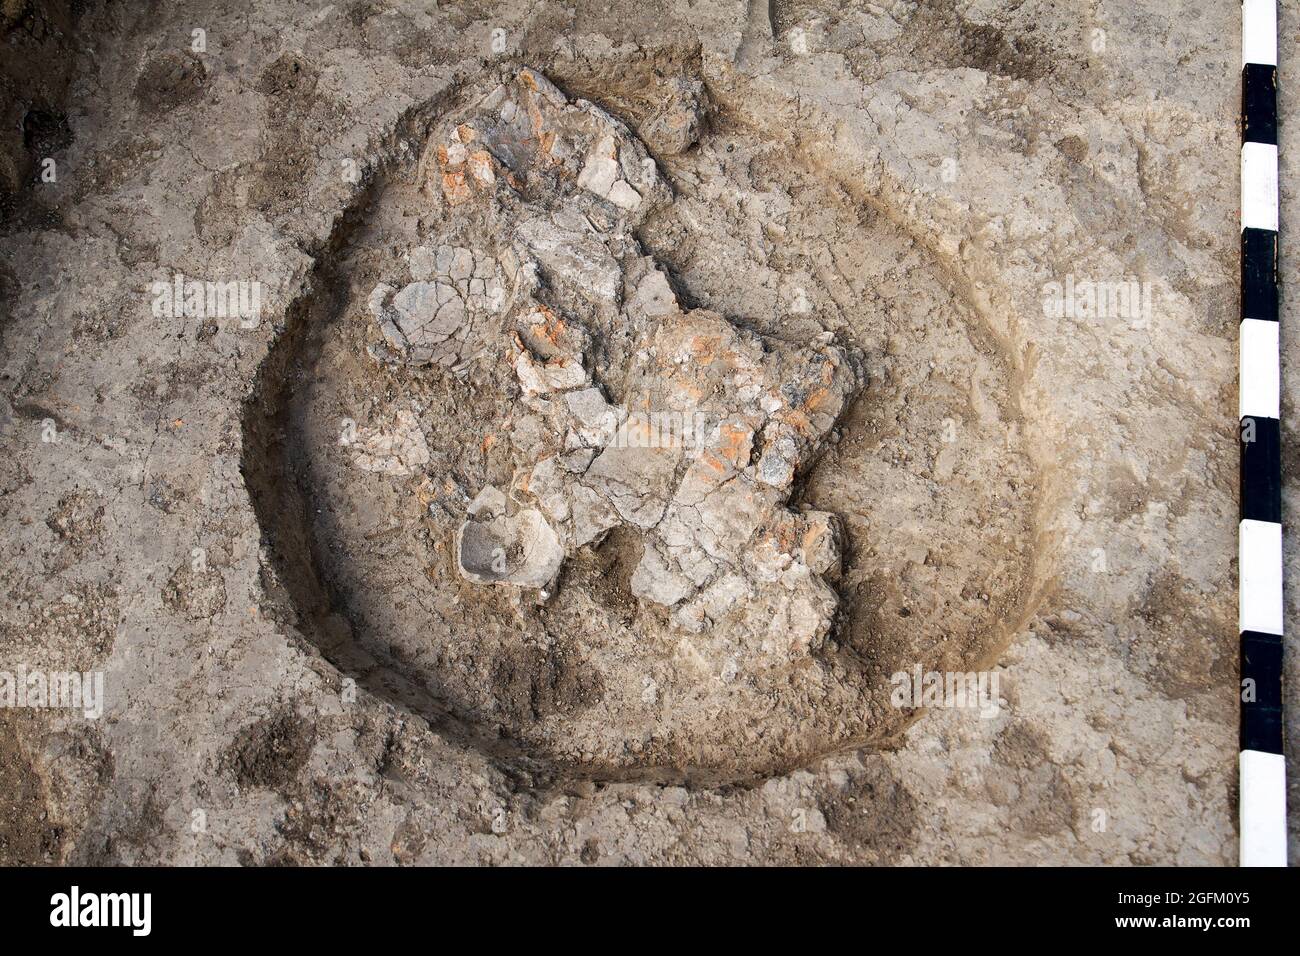 Archaeological excavations, dig up an ancient clay artifact with special tools in soil Stock Photo